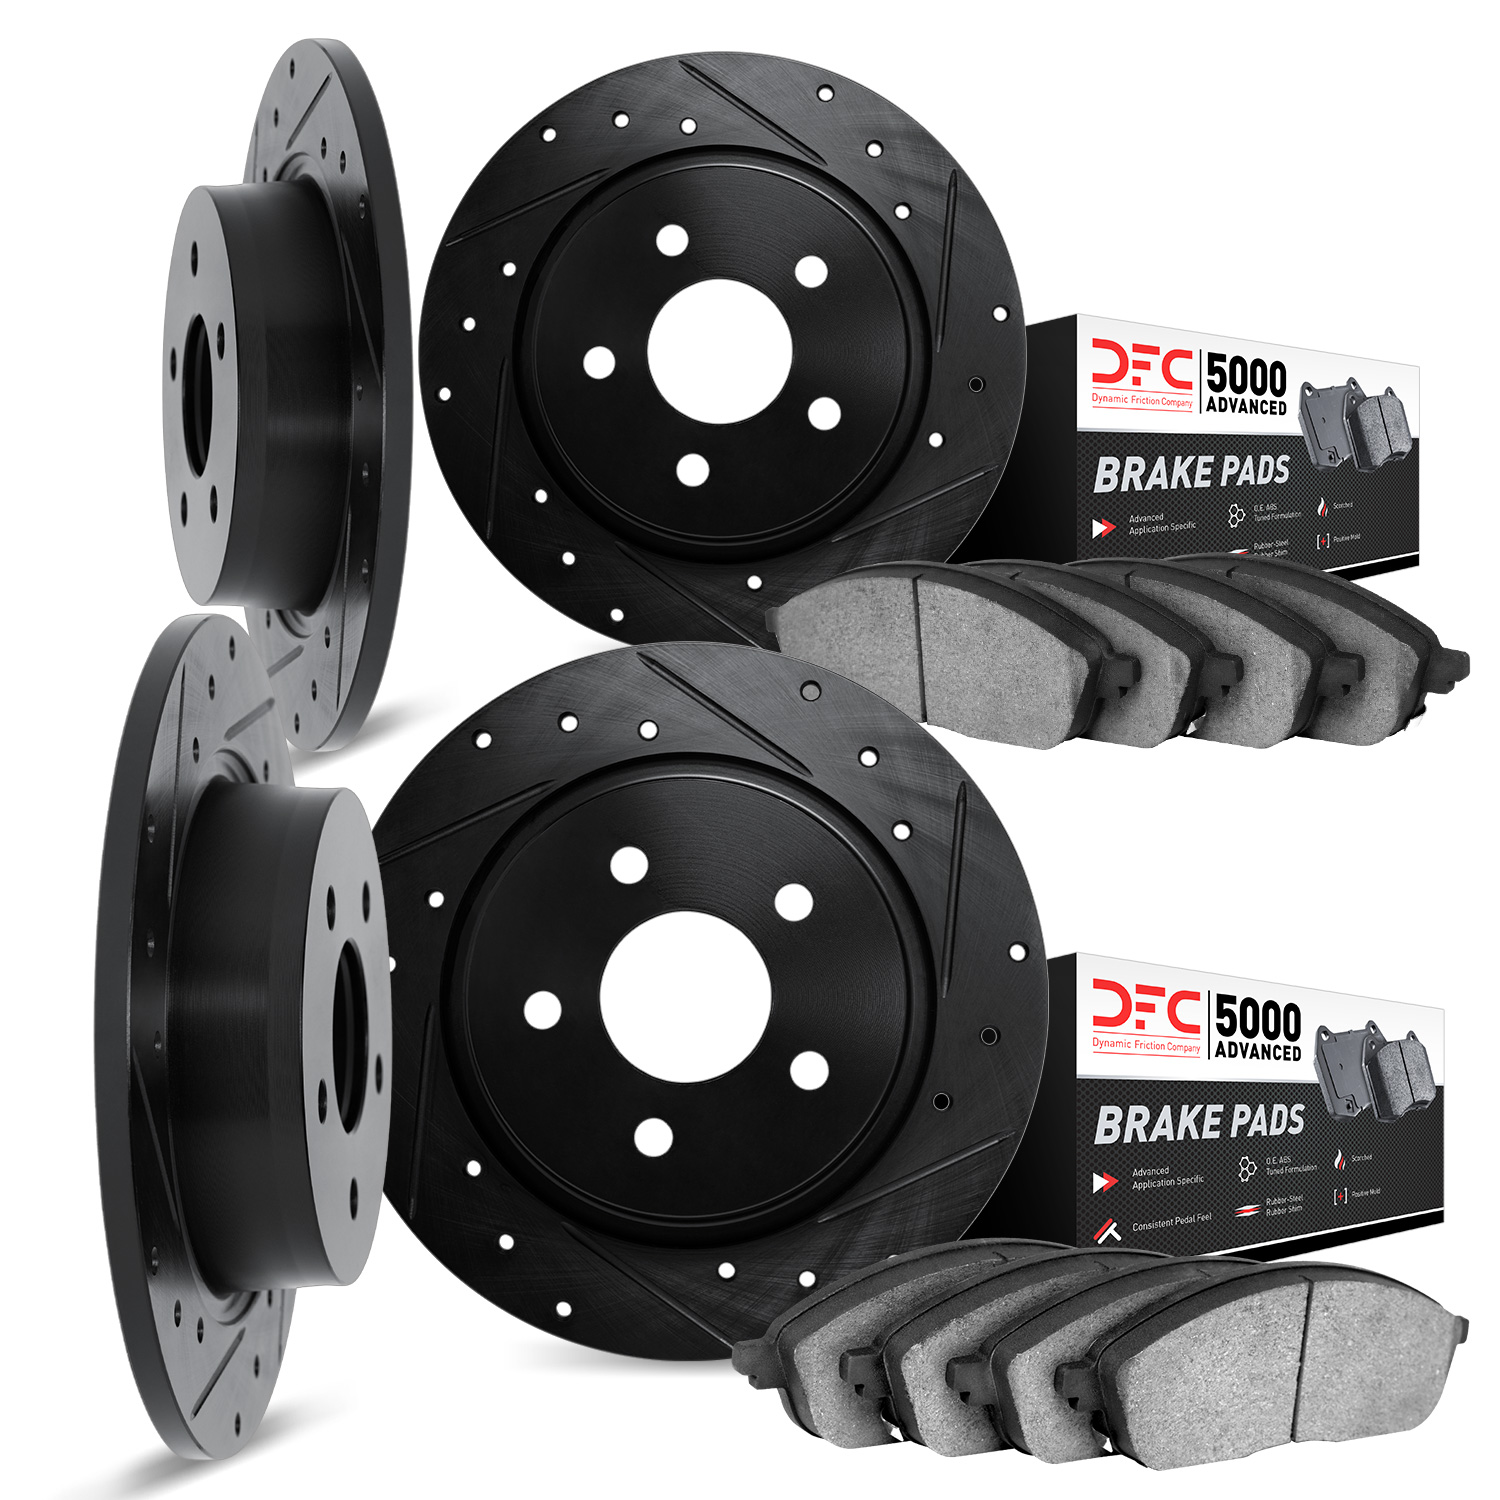 8504-11002 Drilled/Slotted Brake Rotors w/5000 Advanced Brake Pads Kit [Black], 1974-1974 Land Rover, Position: Front and Rear